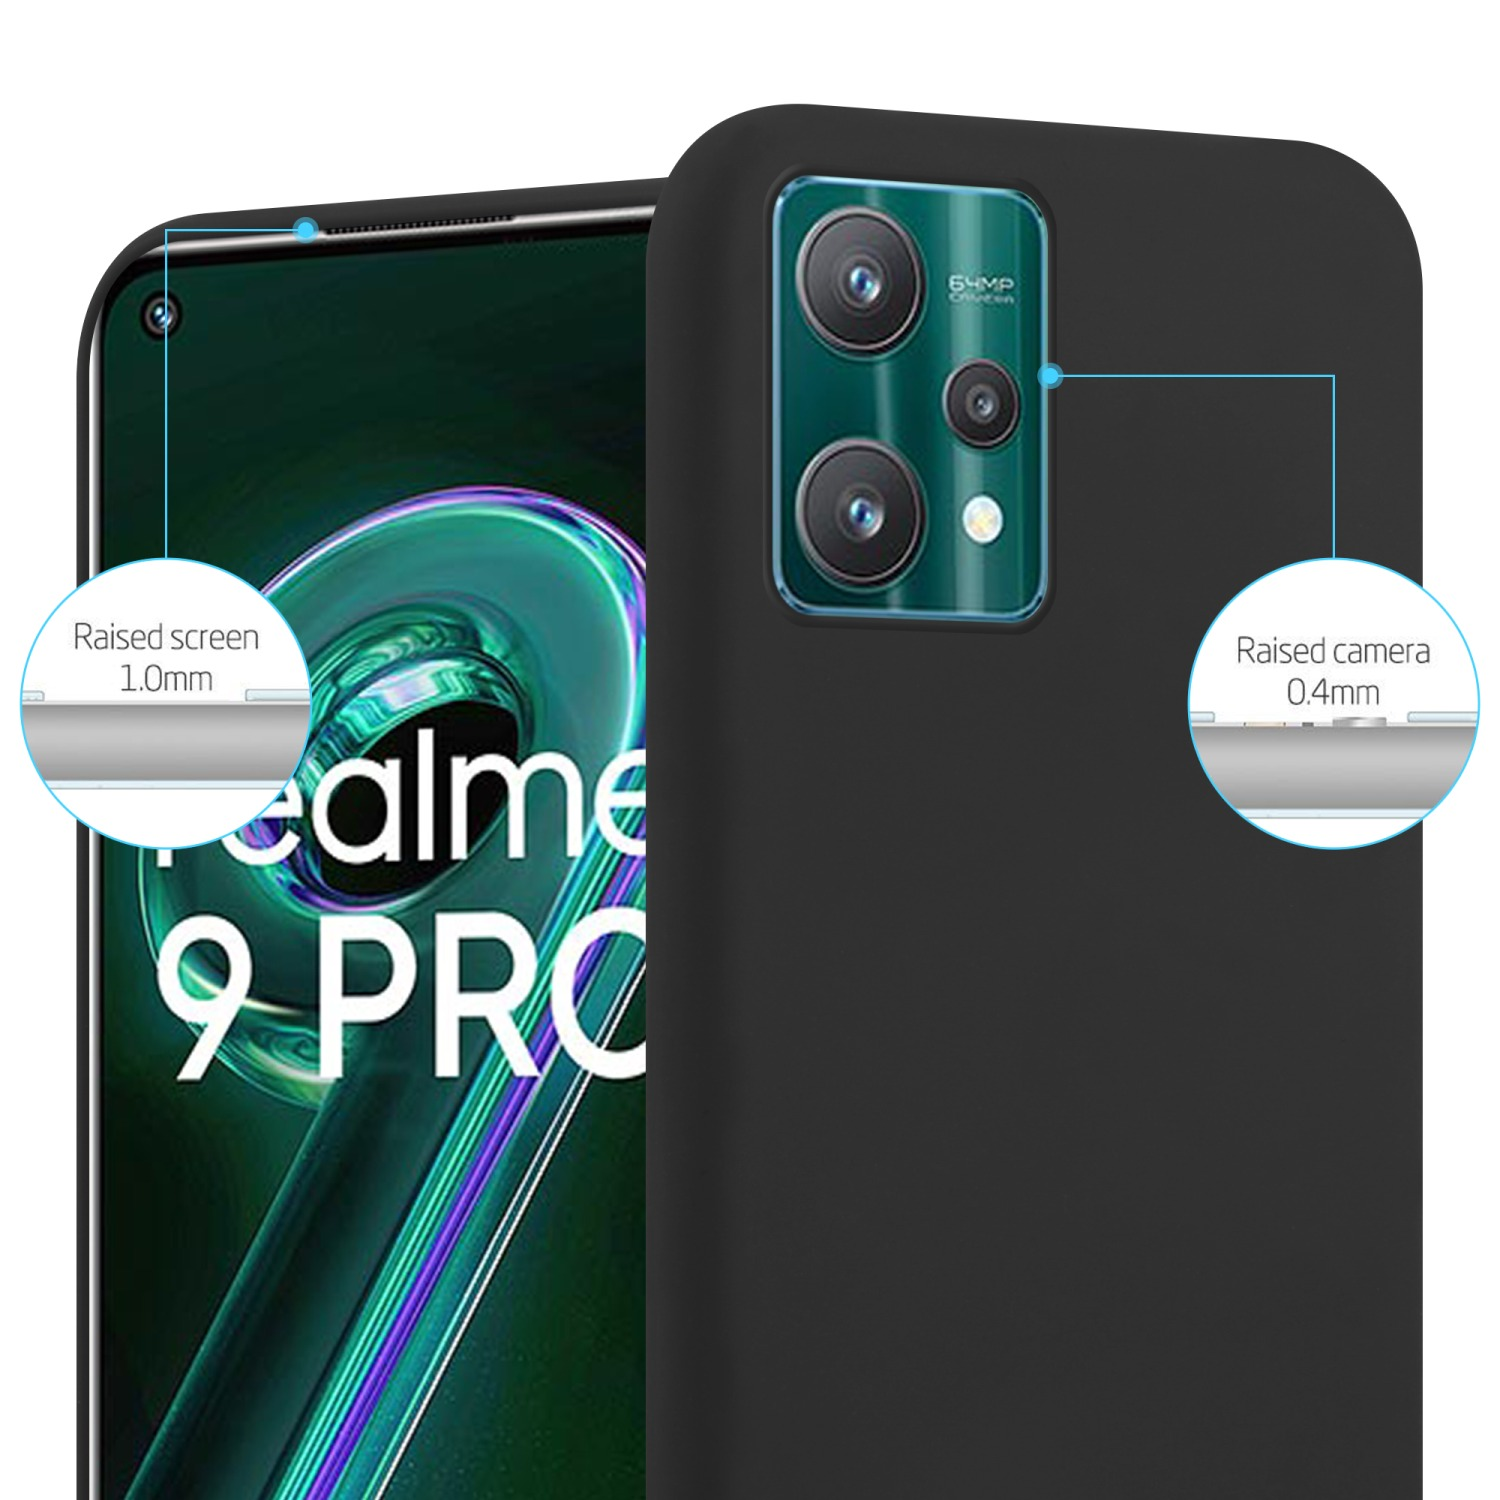 5G, 5G 9 Realme, / Backcover, PRO SCHWARZ / Style, 9 TPU / OnePlus V25 CE im LITE / Candy Nord CANDY 2 Hülle CADORABO Q5